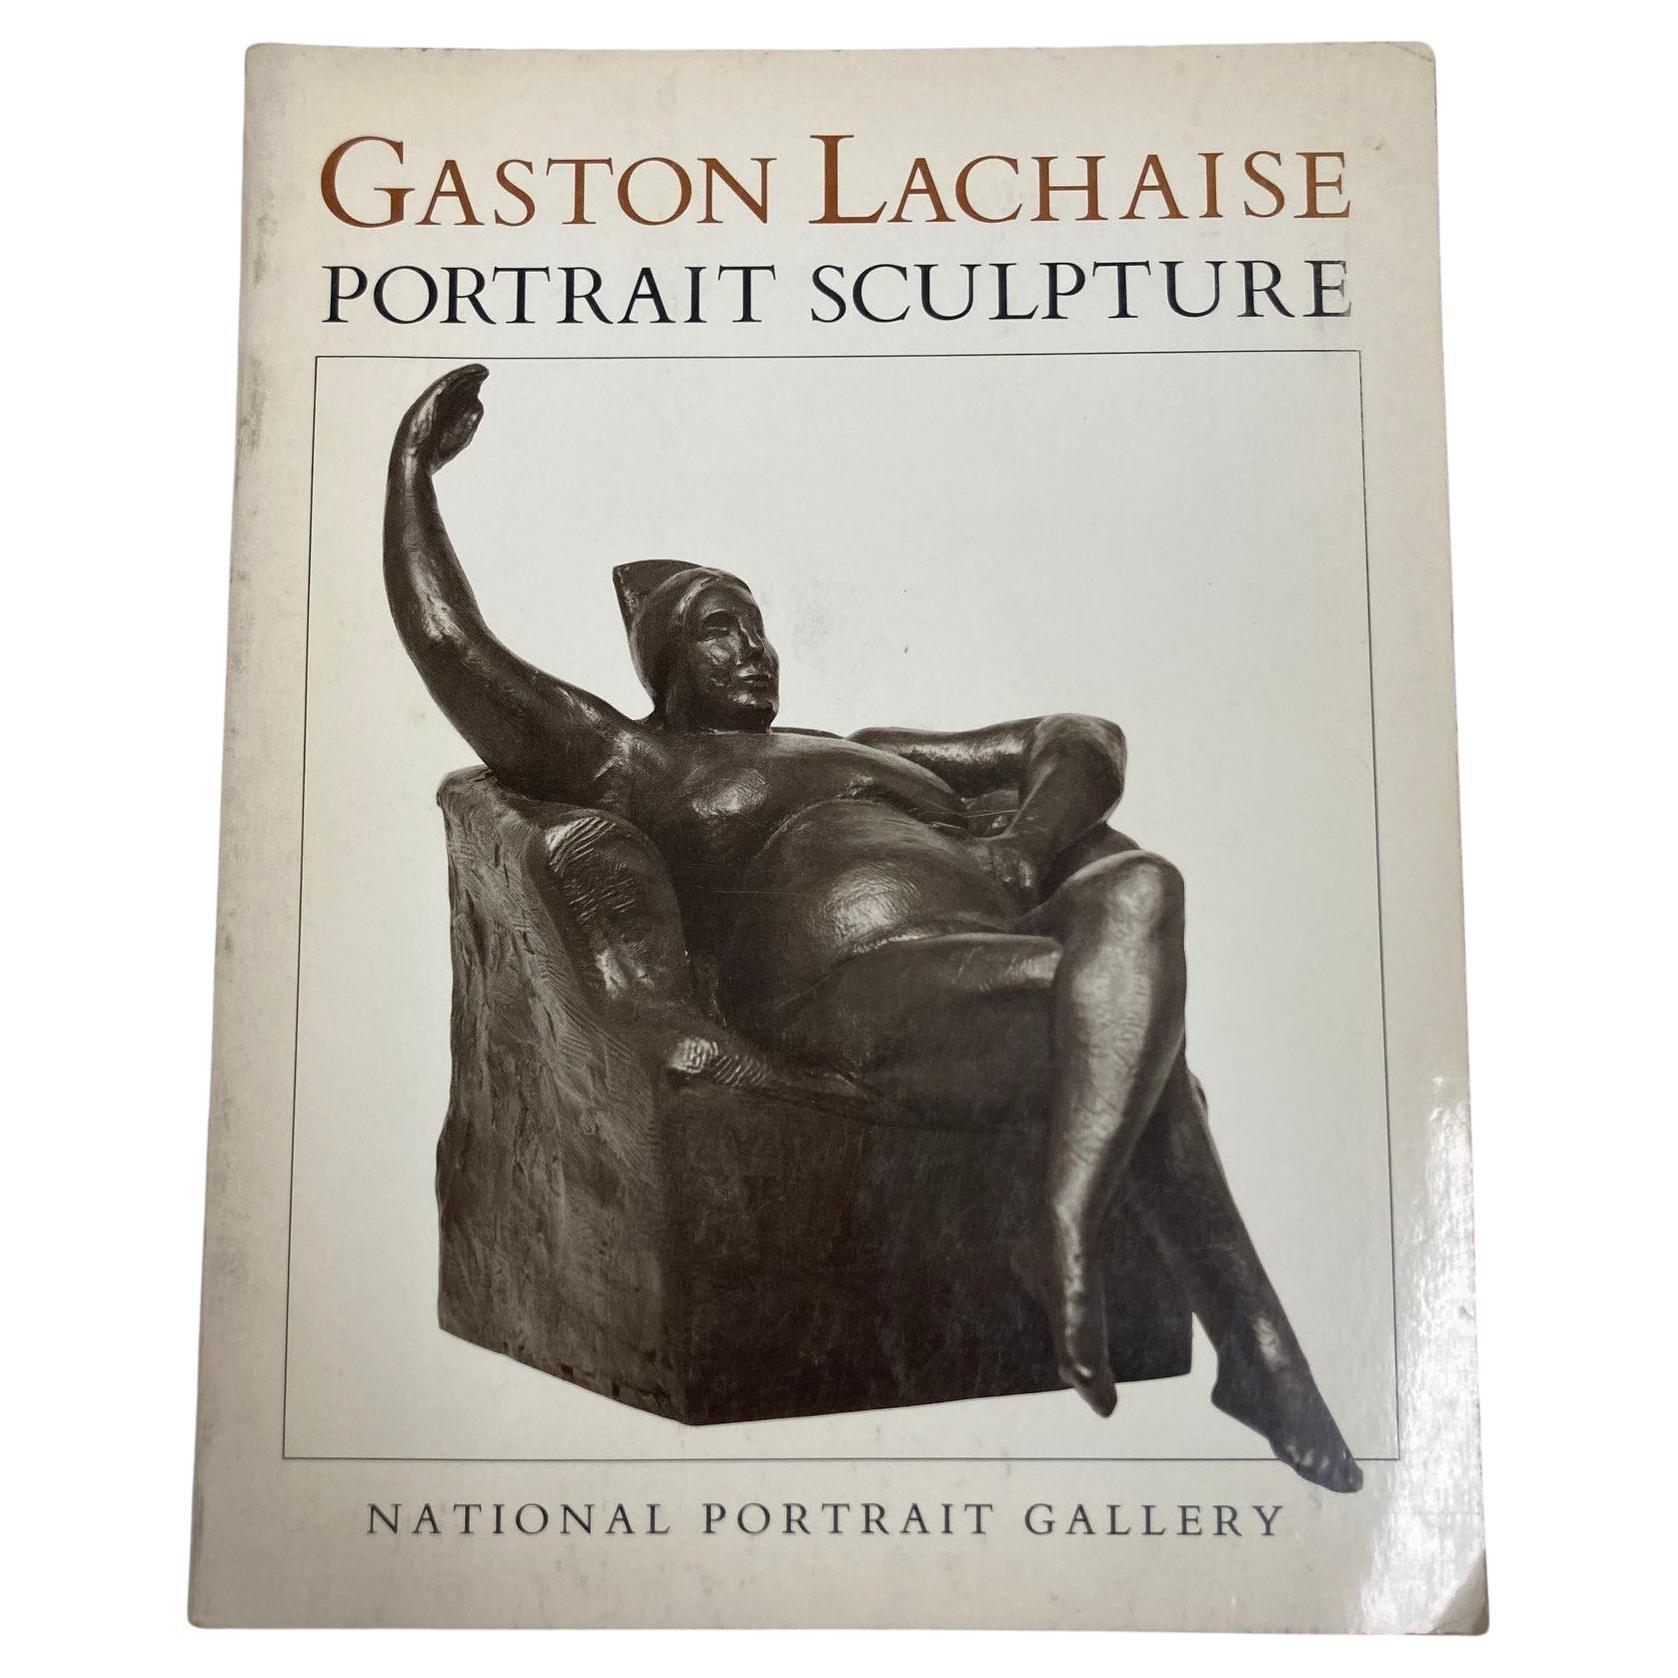 Gaston Lachaise: Portrait Sculpture by Carolyn Kinder Carr Softcover Book 1985